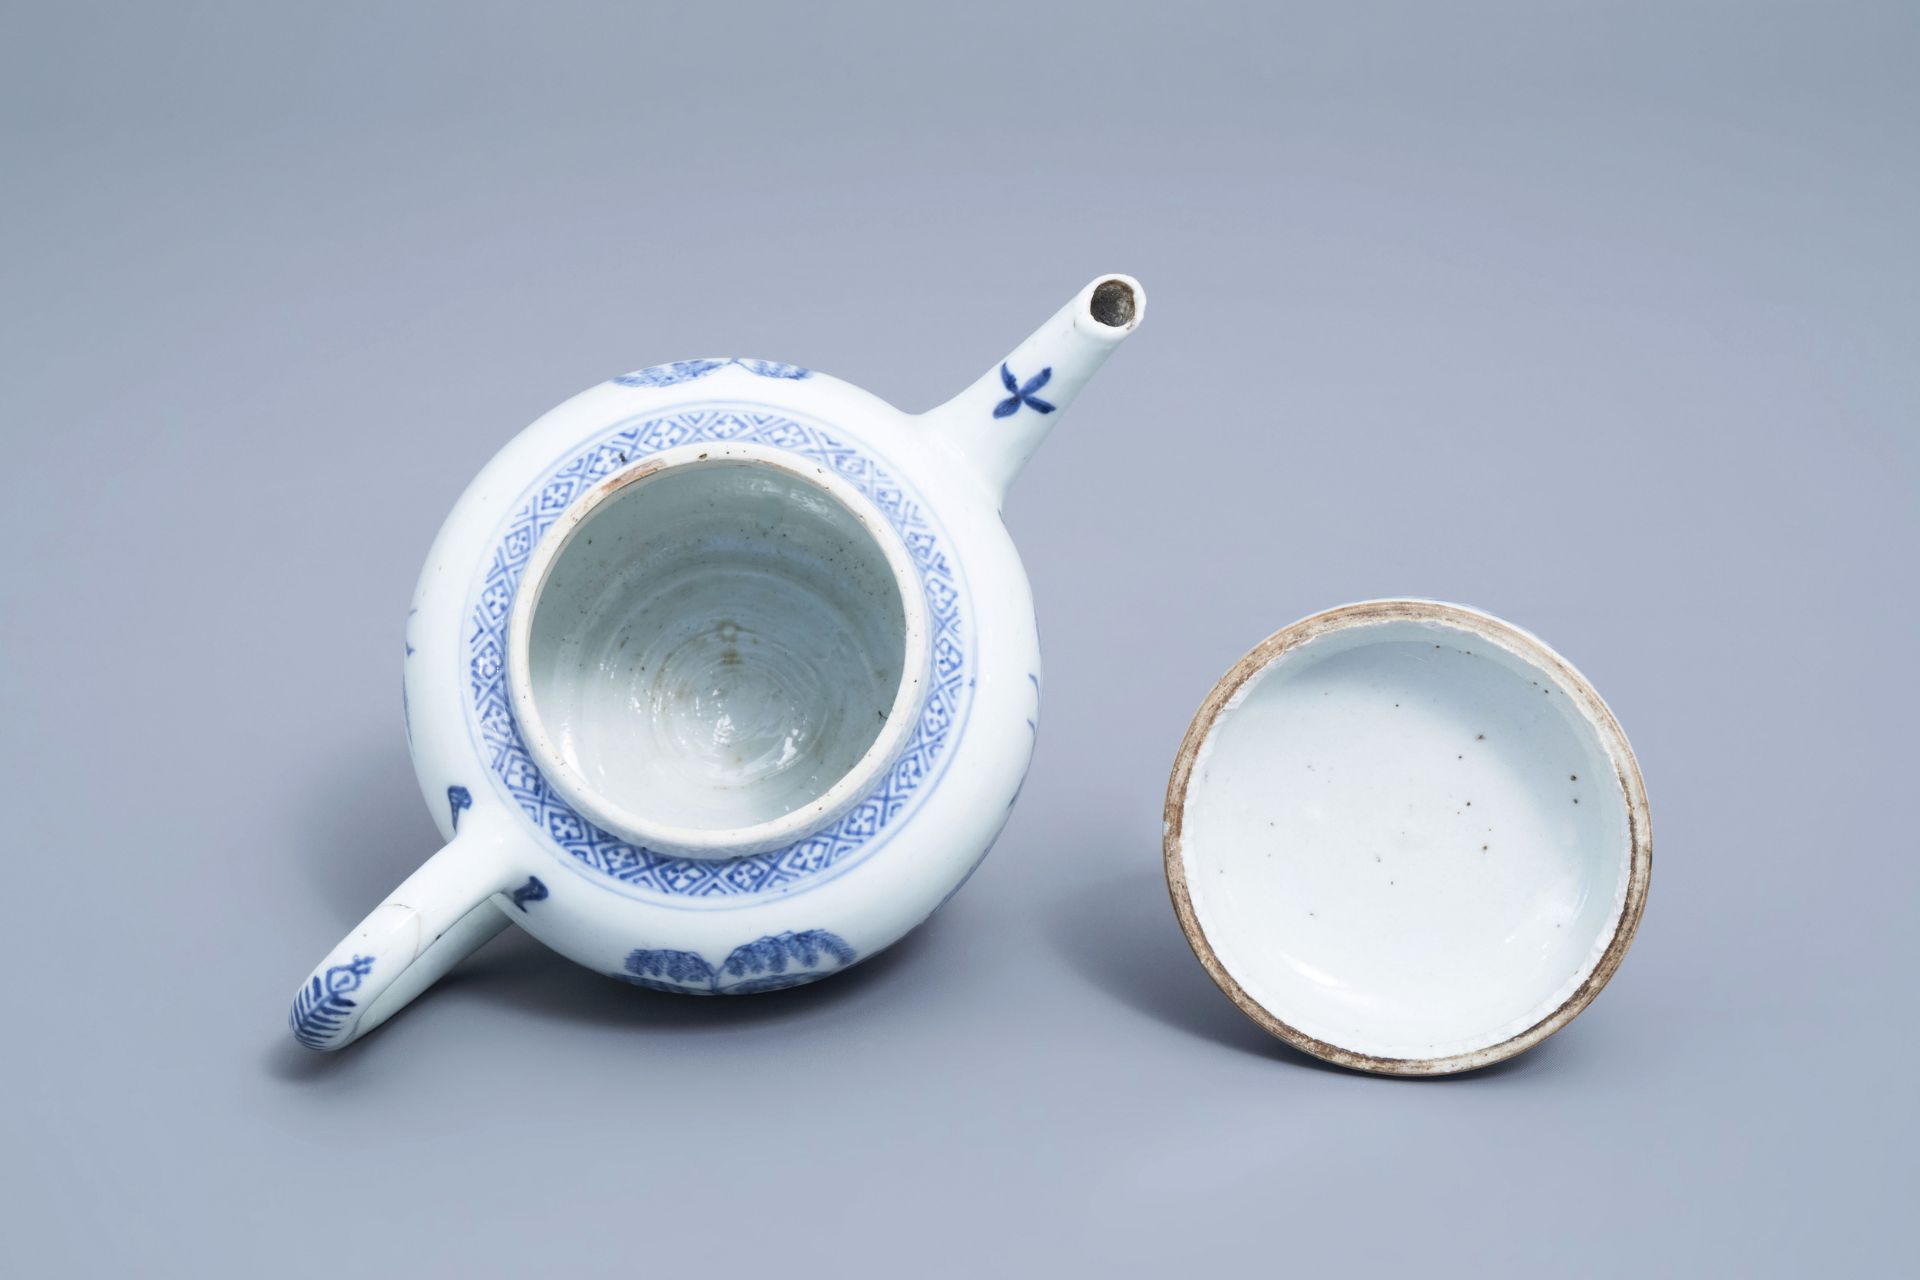 A varied collection of Chinese blue and white porcelain, 18th C. and later - Image 16 of 54